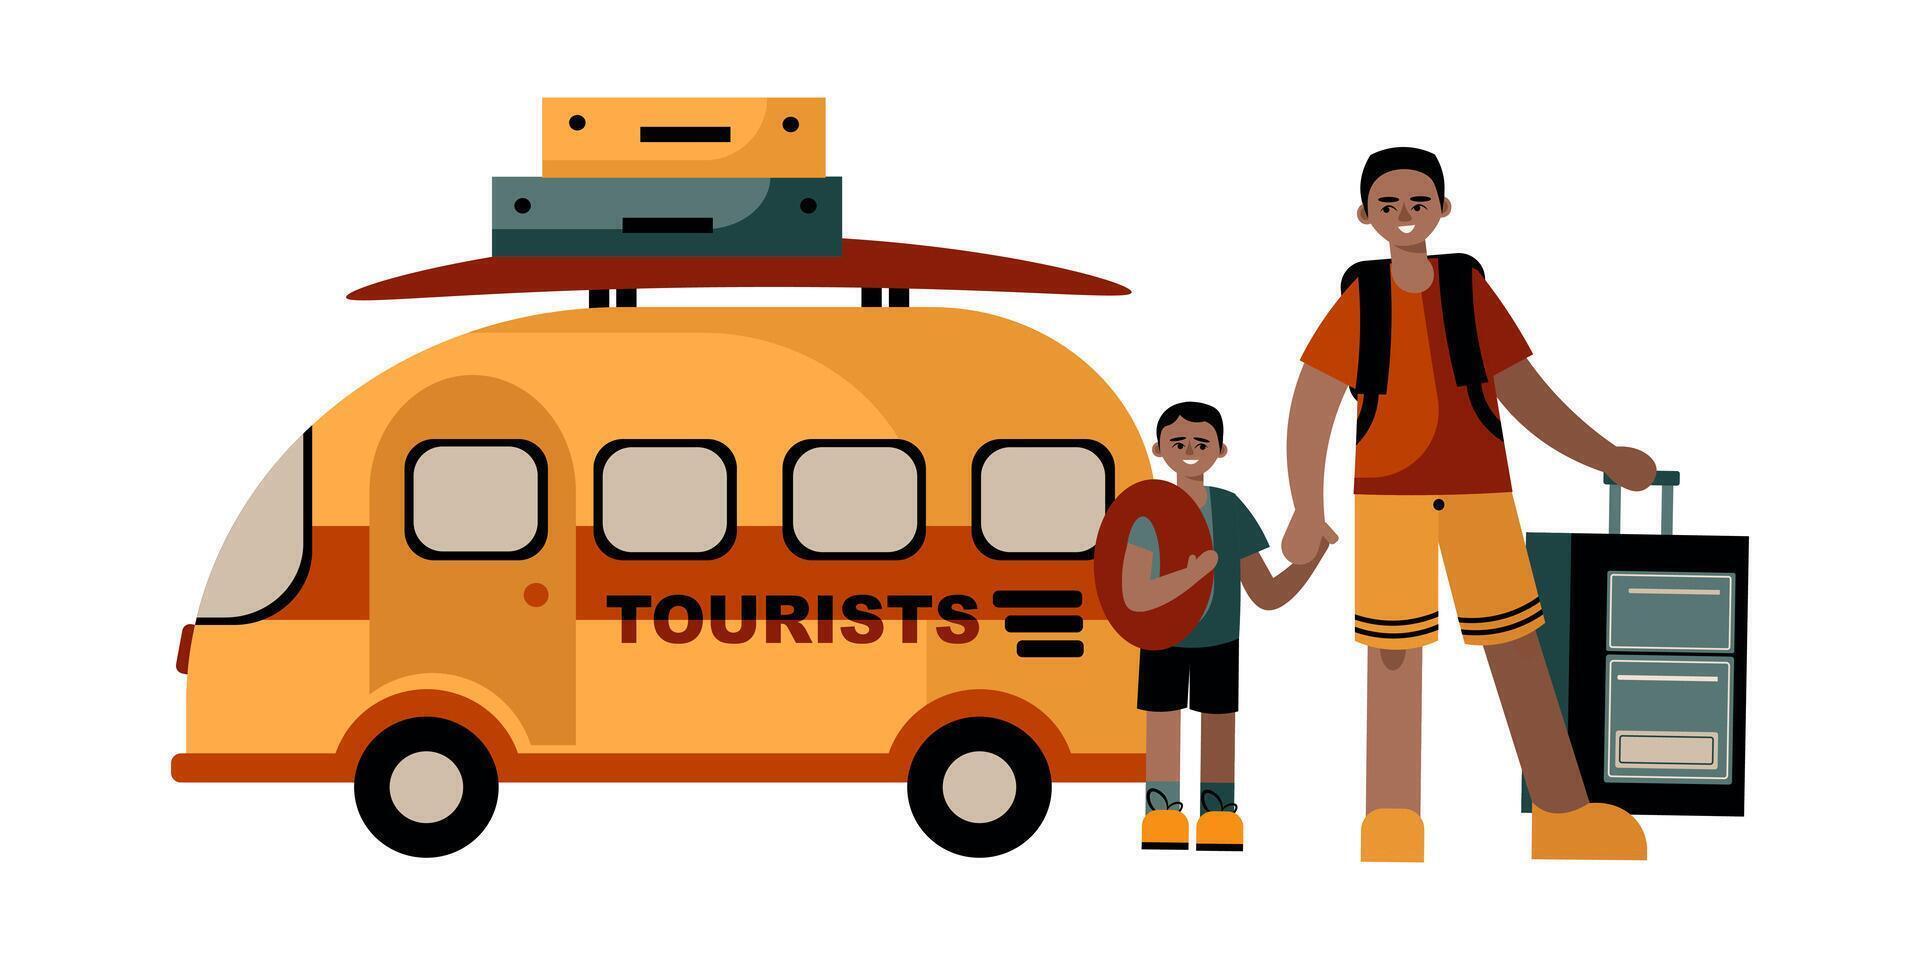 American young dad with son standing with baggage near bus for tourists vector